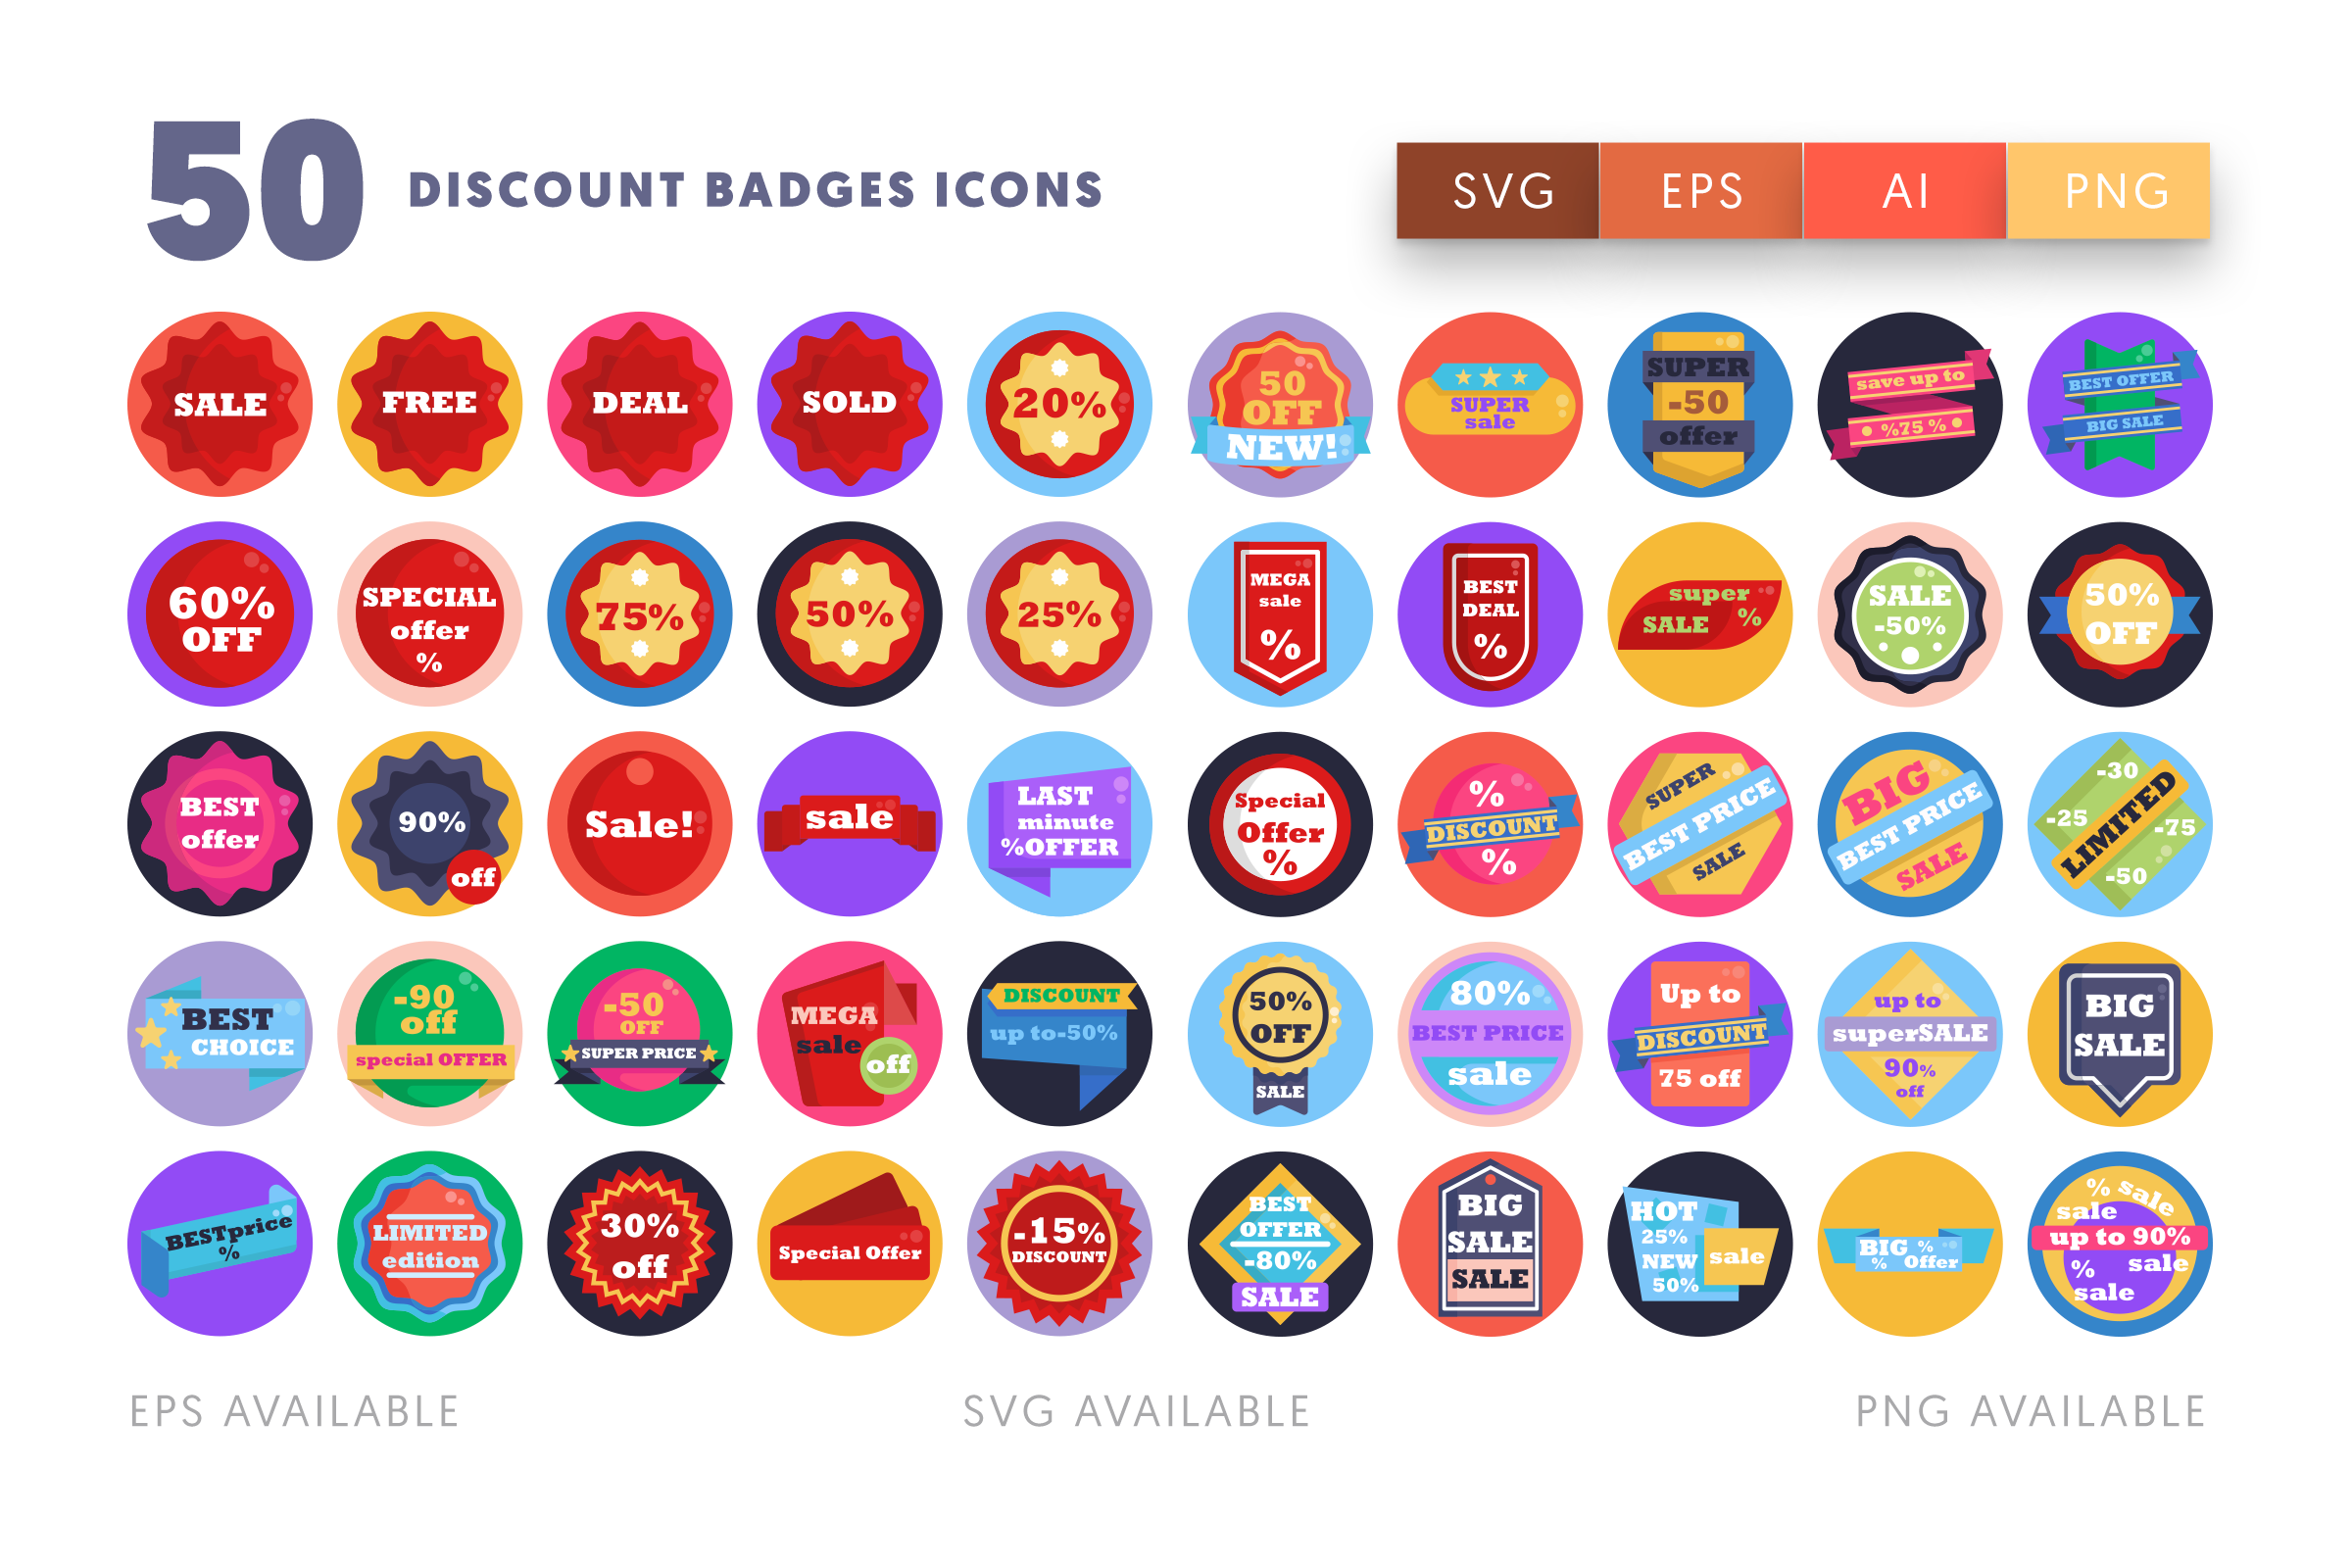 Discount Badges icons png/svg/eps